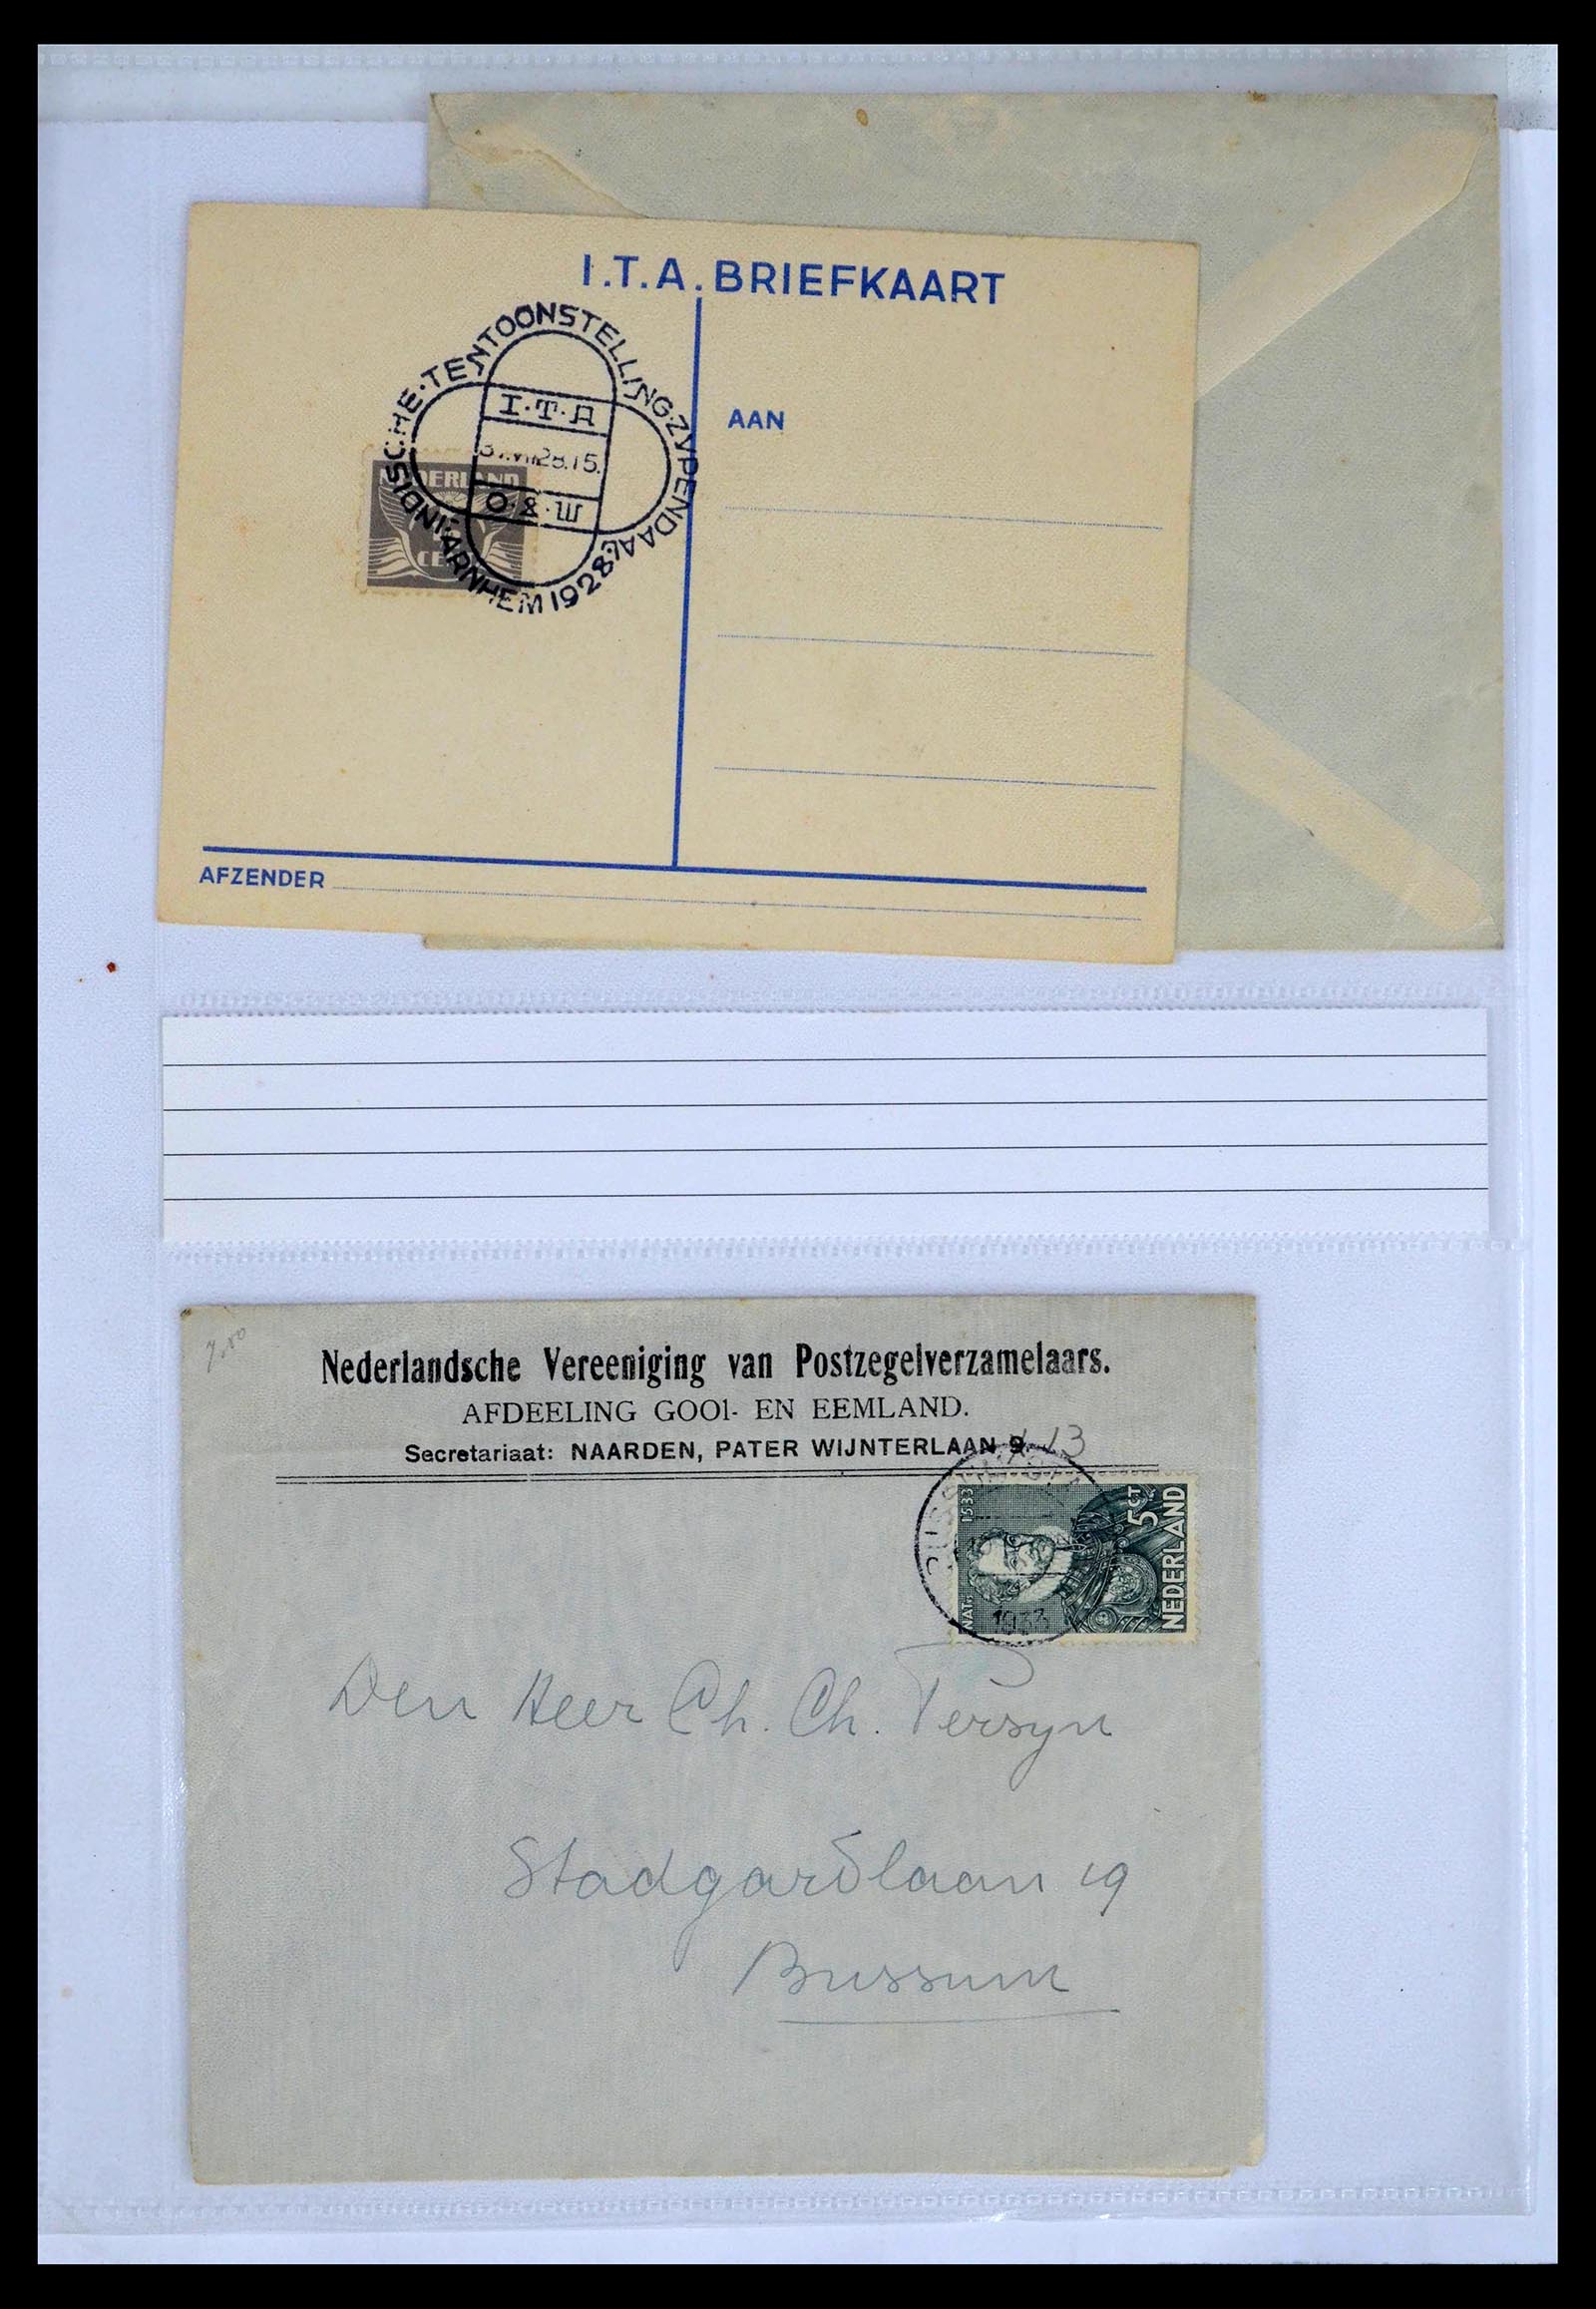 39429 0039 - Stamp collection 39429 Netherlands covers 1821-1955.